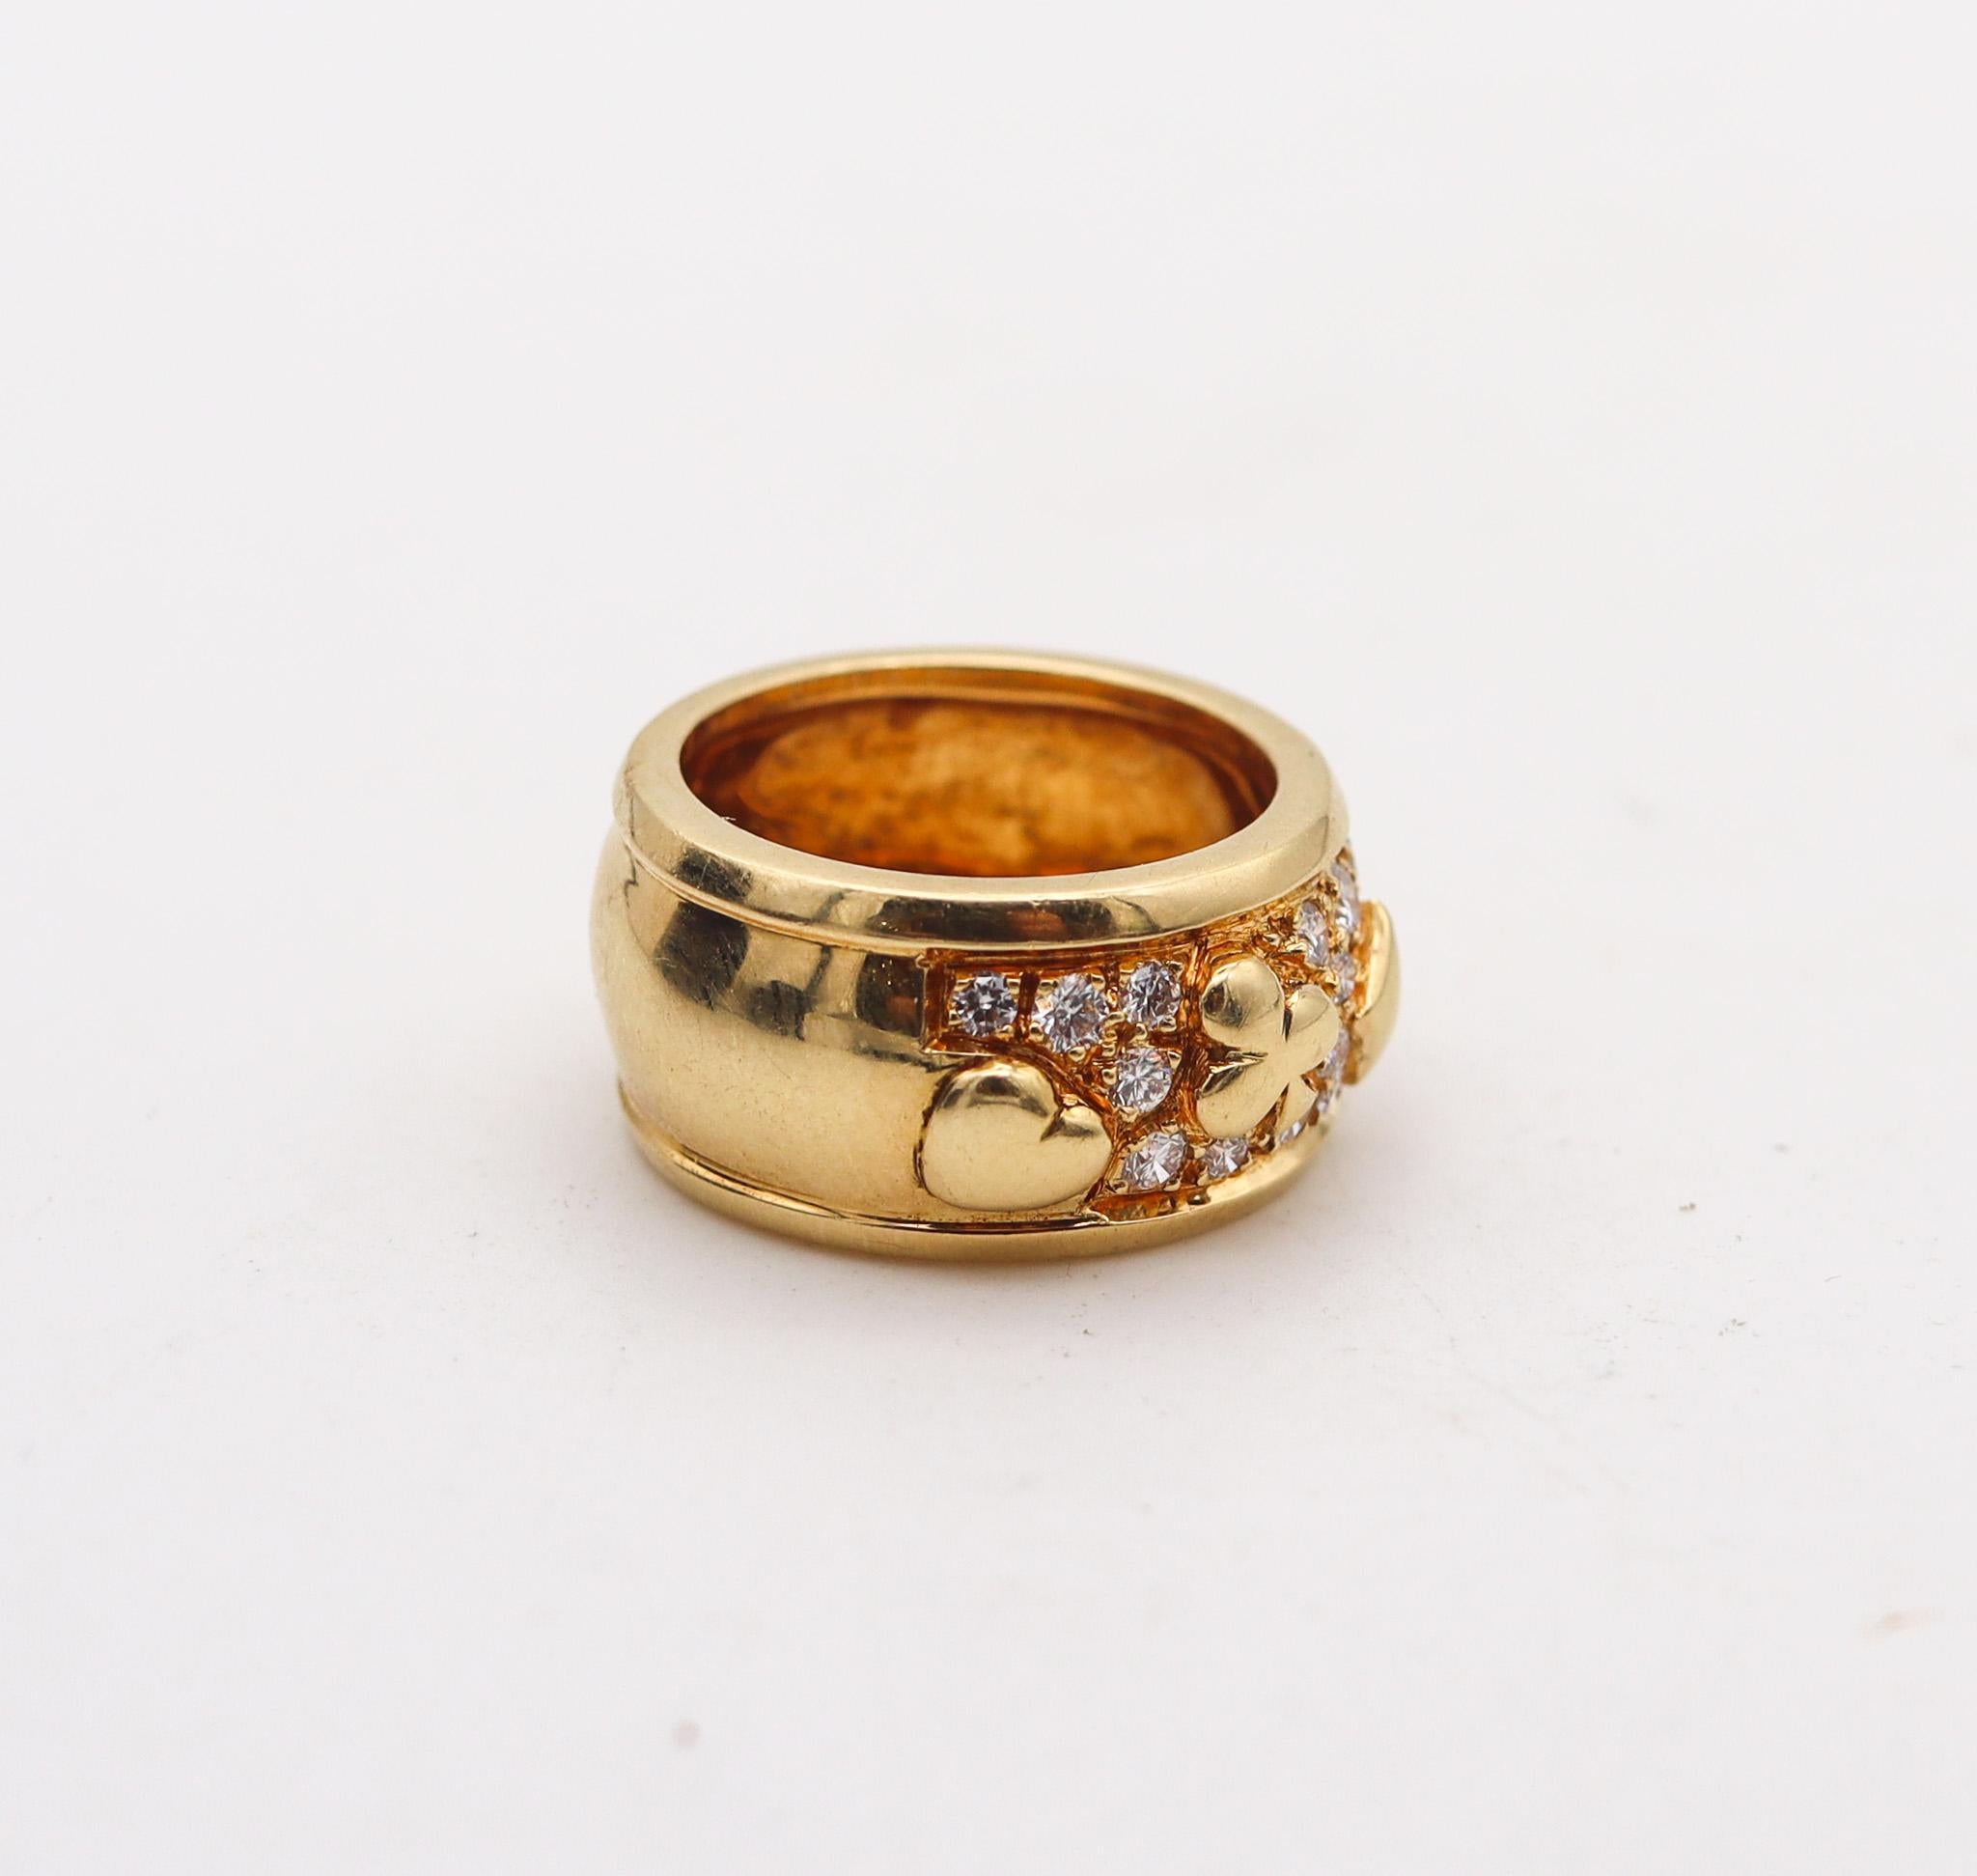 Modernist Marchak Paris Casino Motifs Band Ring In 18Kt Yellow Gold With VS Diamonds For Sale